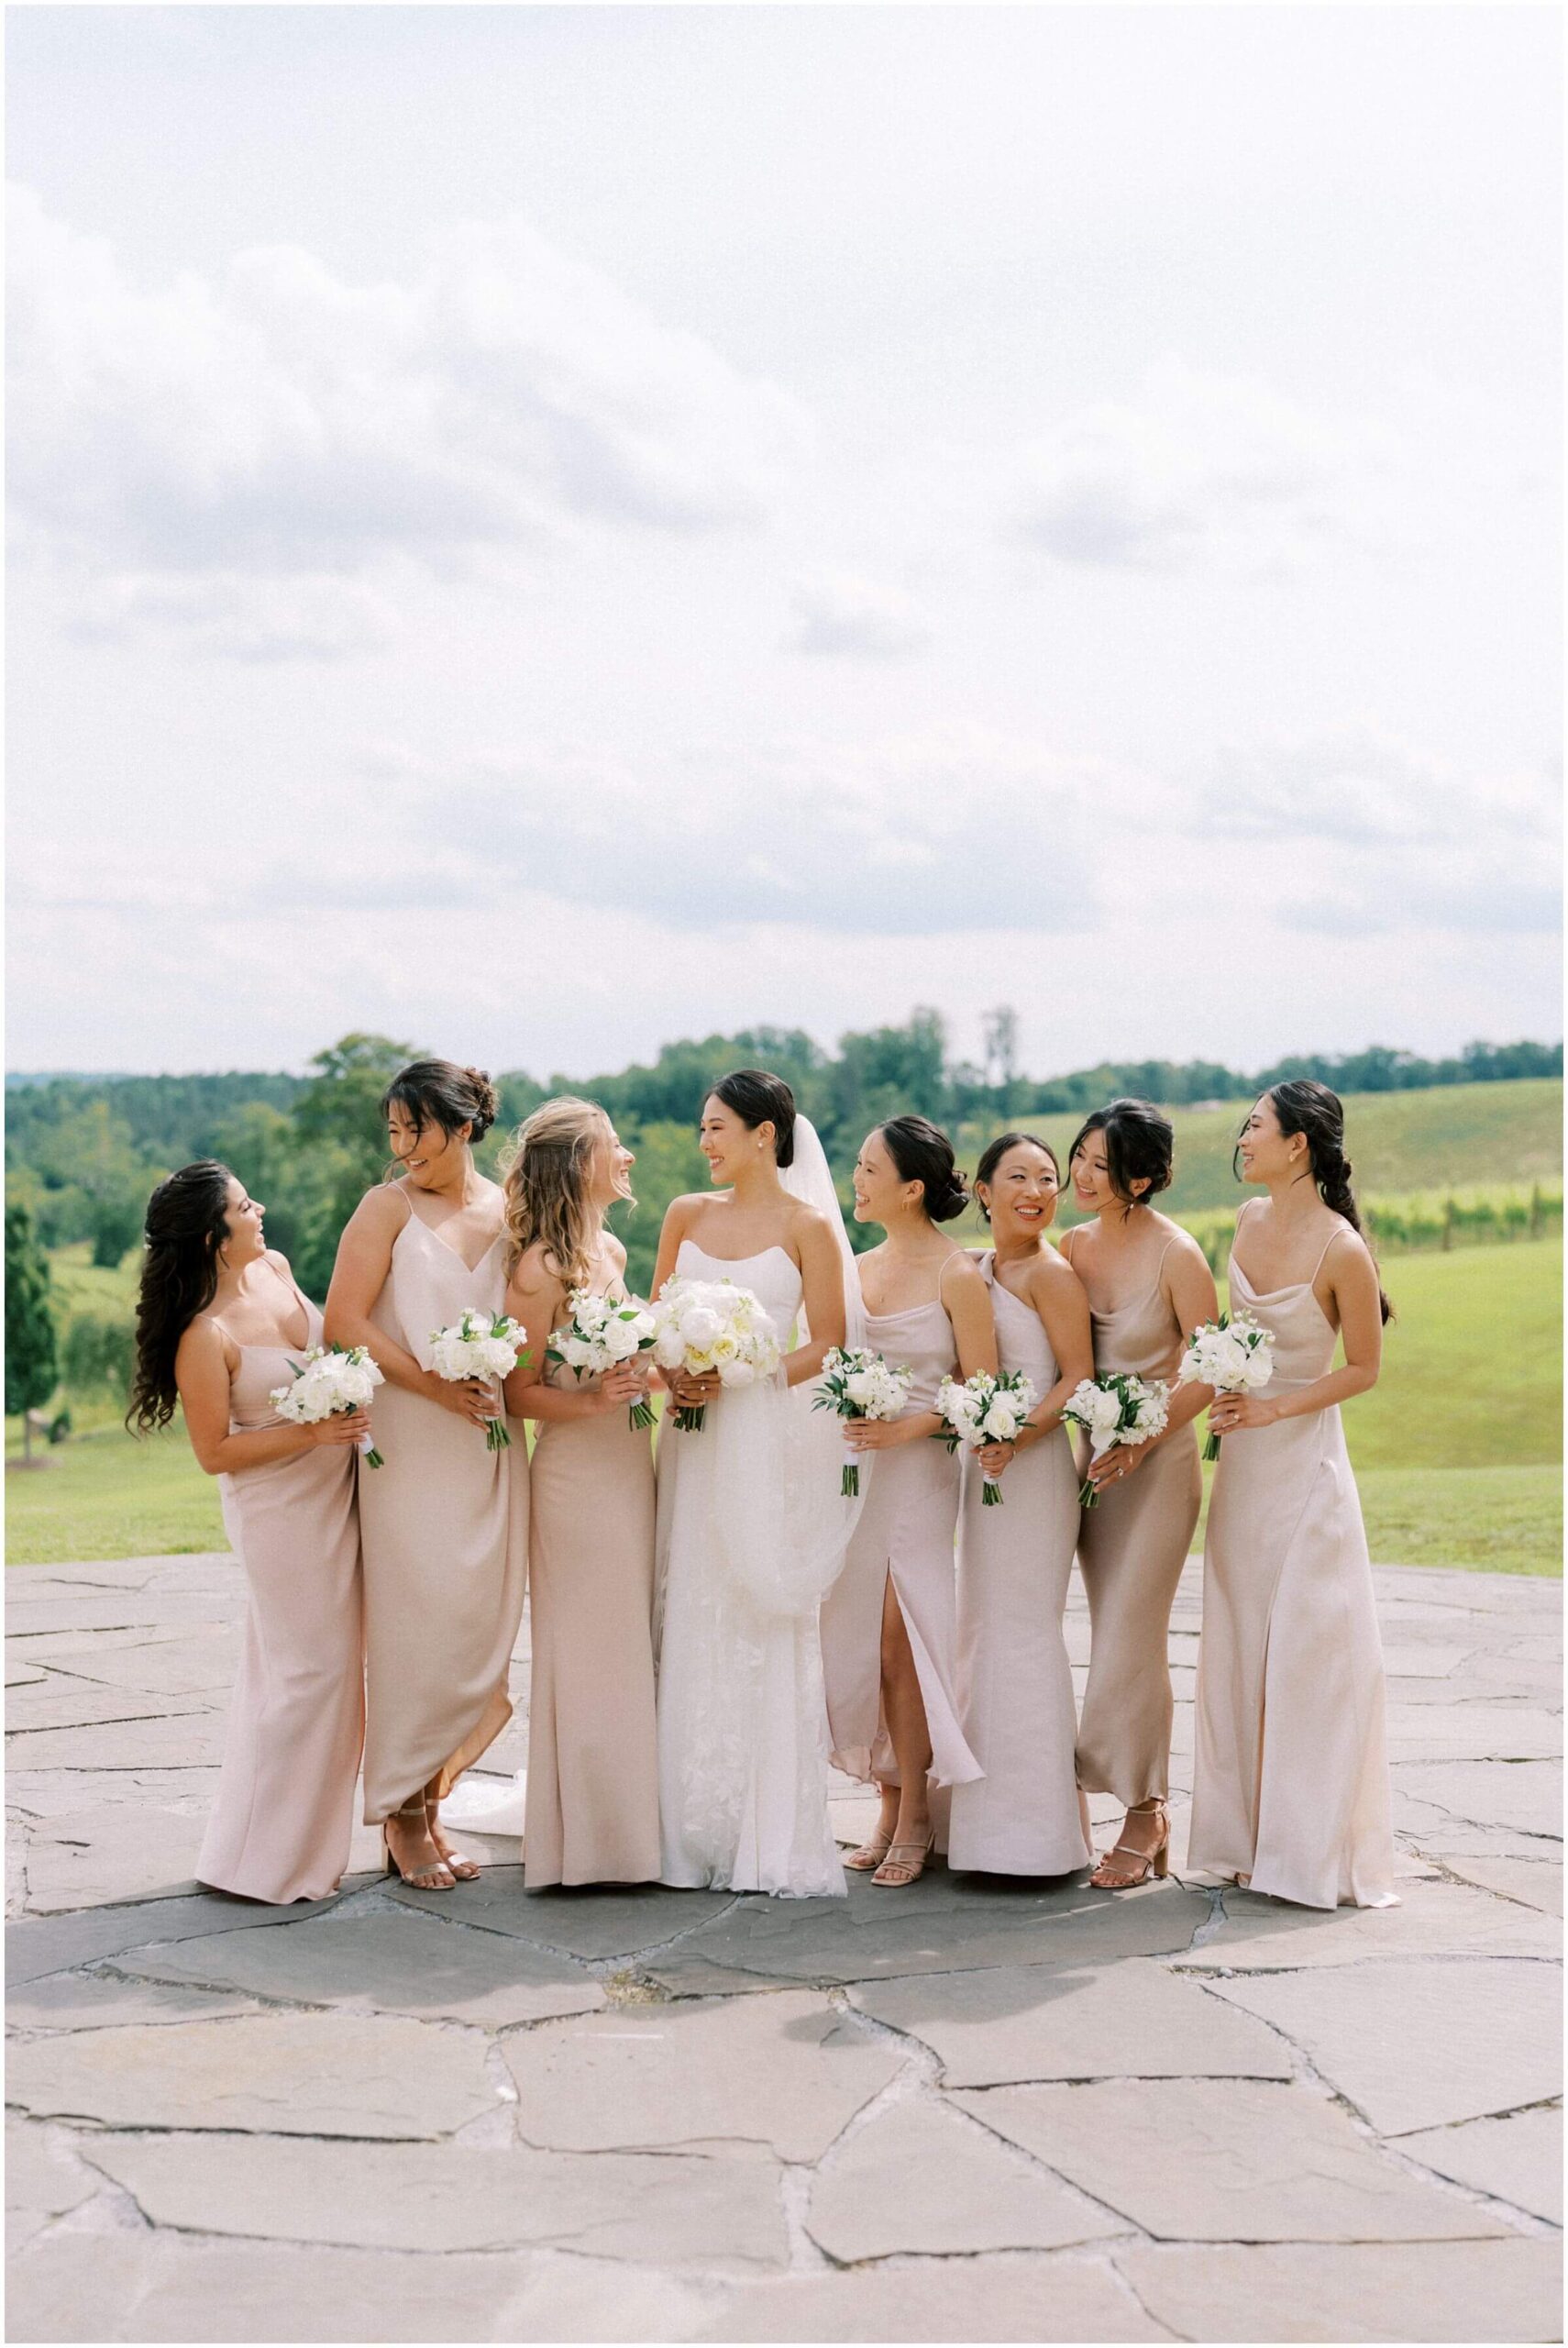 Bride and bridesmaids wedding photography on patio at Stone Tower Winery